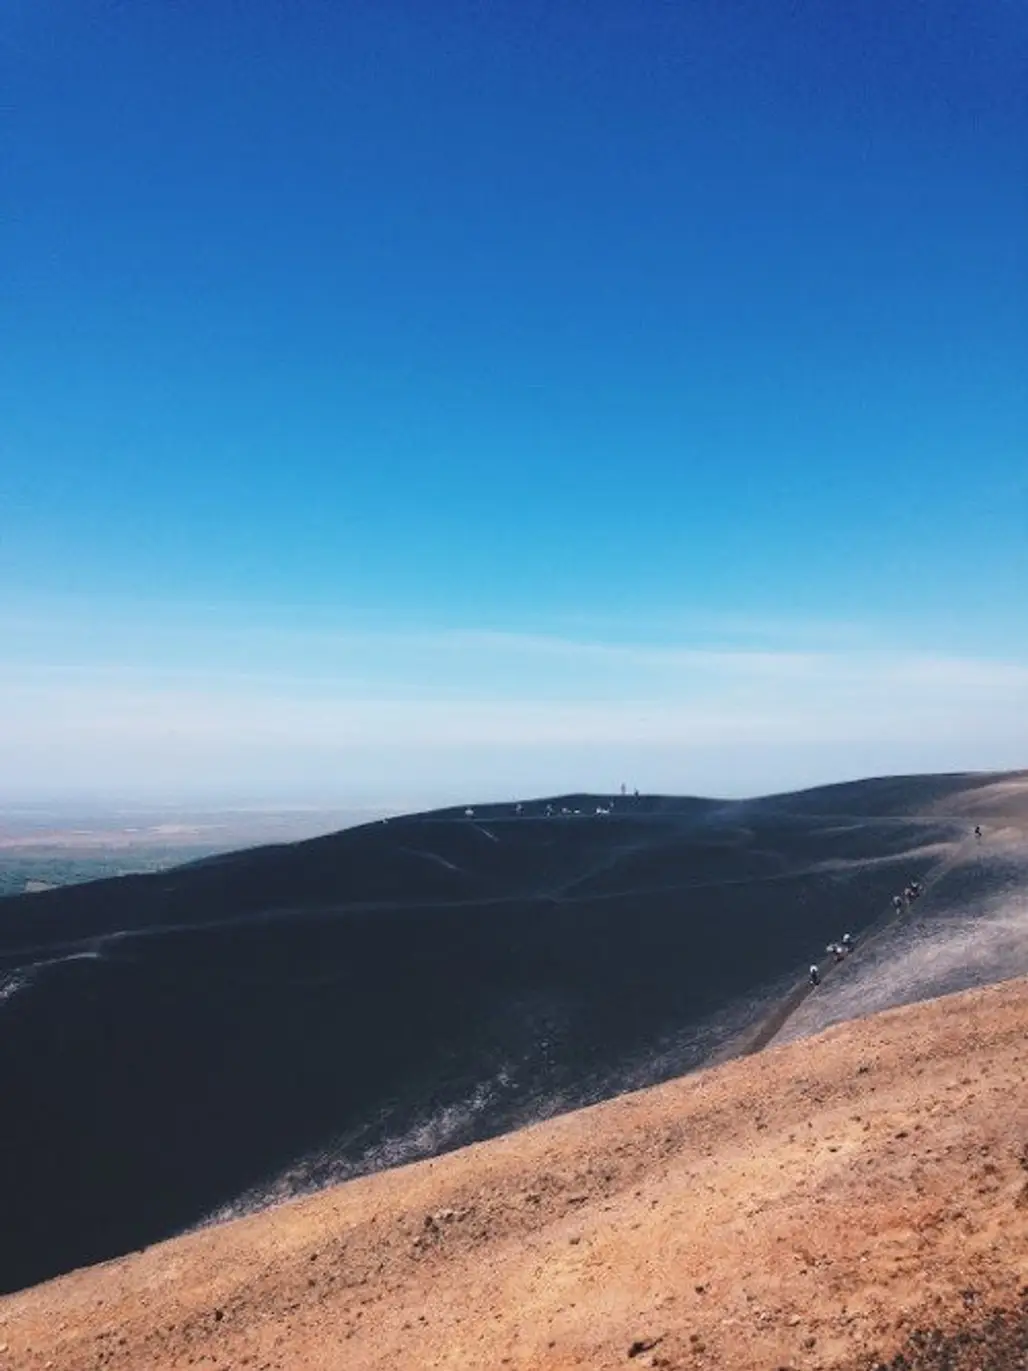 Cerro Negro is the Place for Something Totally Different